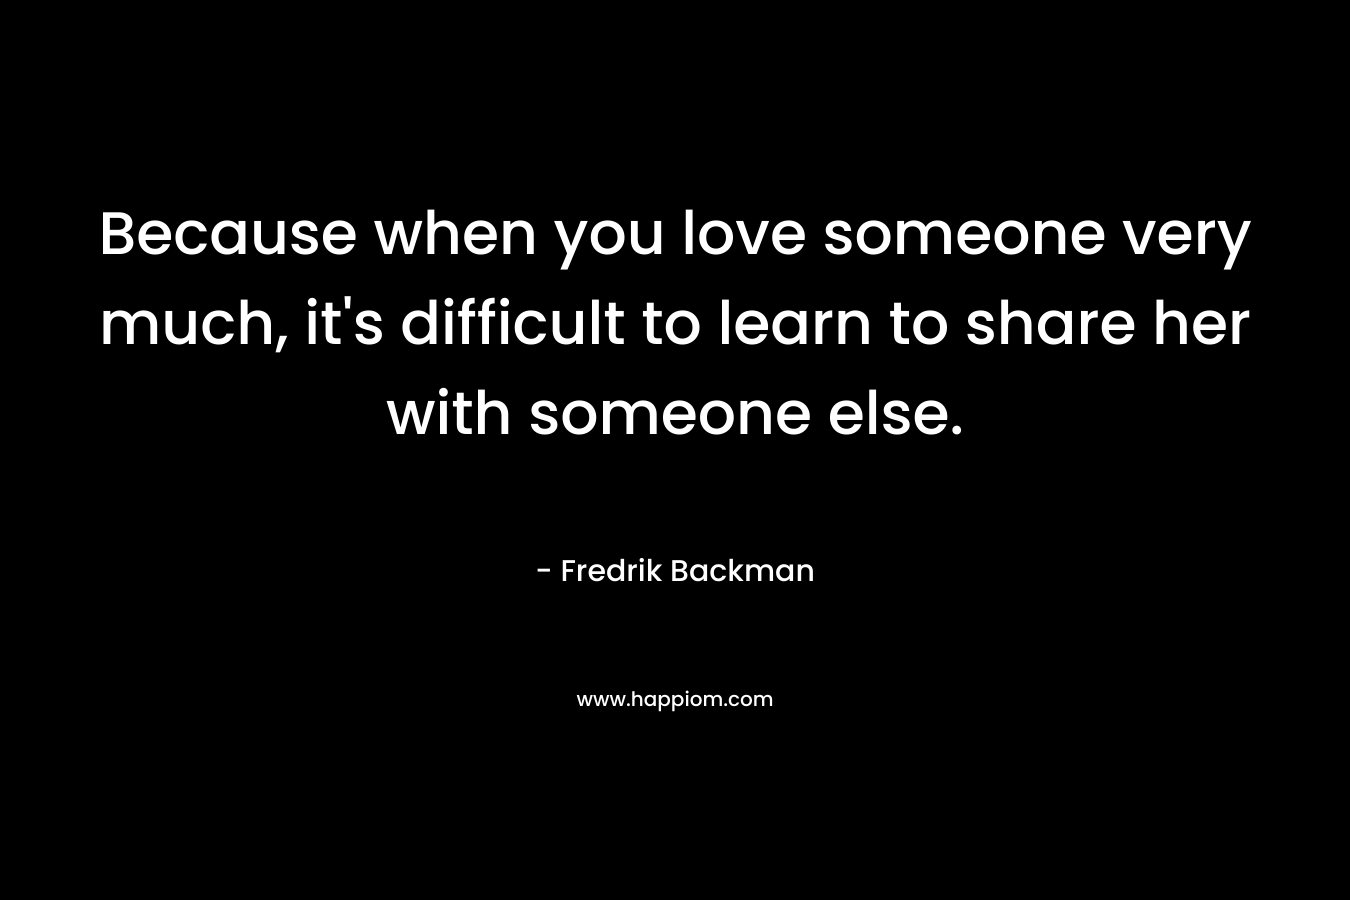 Because when you love someone very much, it's difficult to learn to share her with someone else.